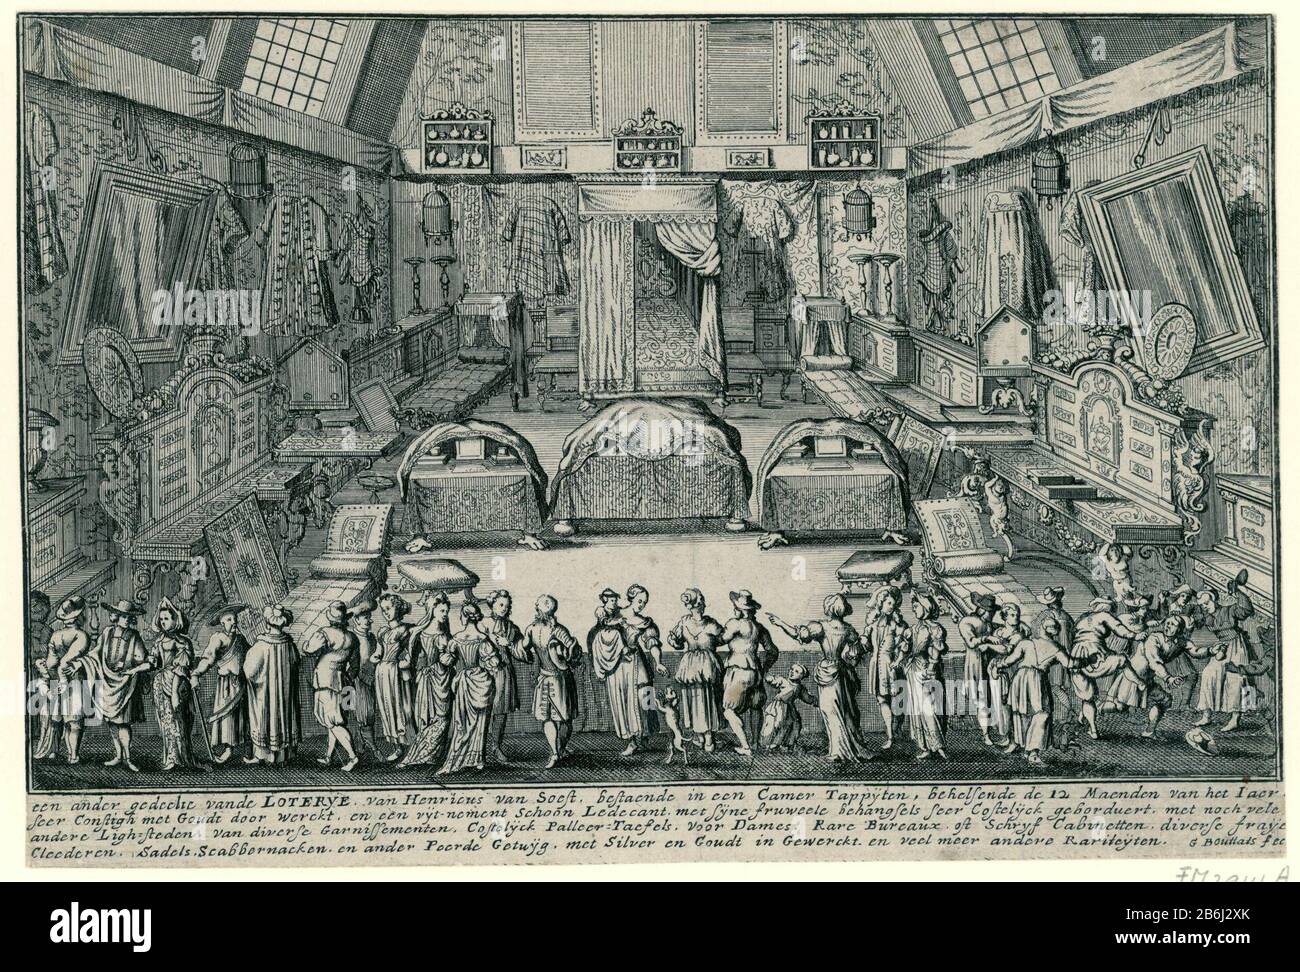 The lottery of Henricus van Soest, Antwerp, 1695 Another portion Vande Loterye of Henricus van Soest () (title object) Other representation of a hall with the established prizes in the lottery by Henricus van Soest, the Bourse in Antwerp in 1695. in front of visitors, including the prices several cribs, furniture and tapestries. Among the performance description in four lines of some of the prices (see also FMH 2941) . Manufacturer : printmaker: Gaspar Bouttats (listed property) Place manufacture: Southern Netherlands Date: 1695 Physical features: etching material: paper Technique: etching Dim Stock Photo